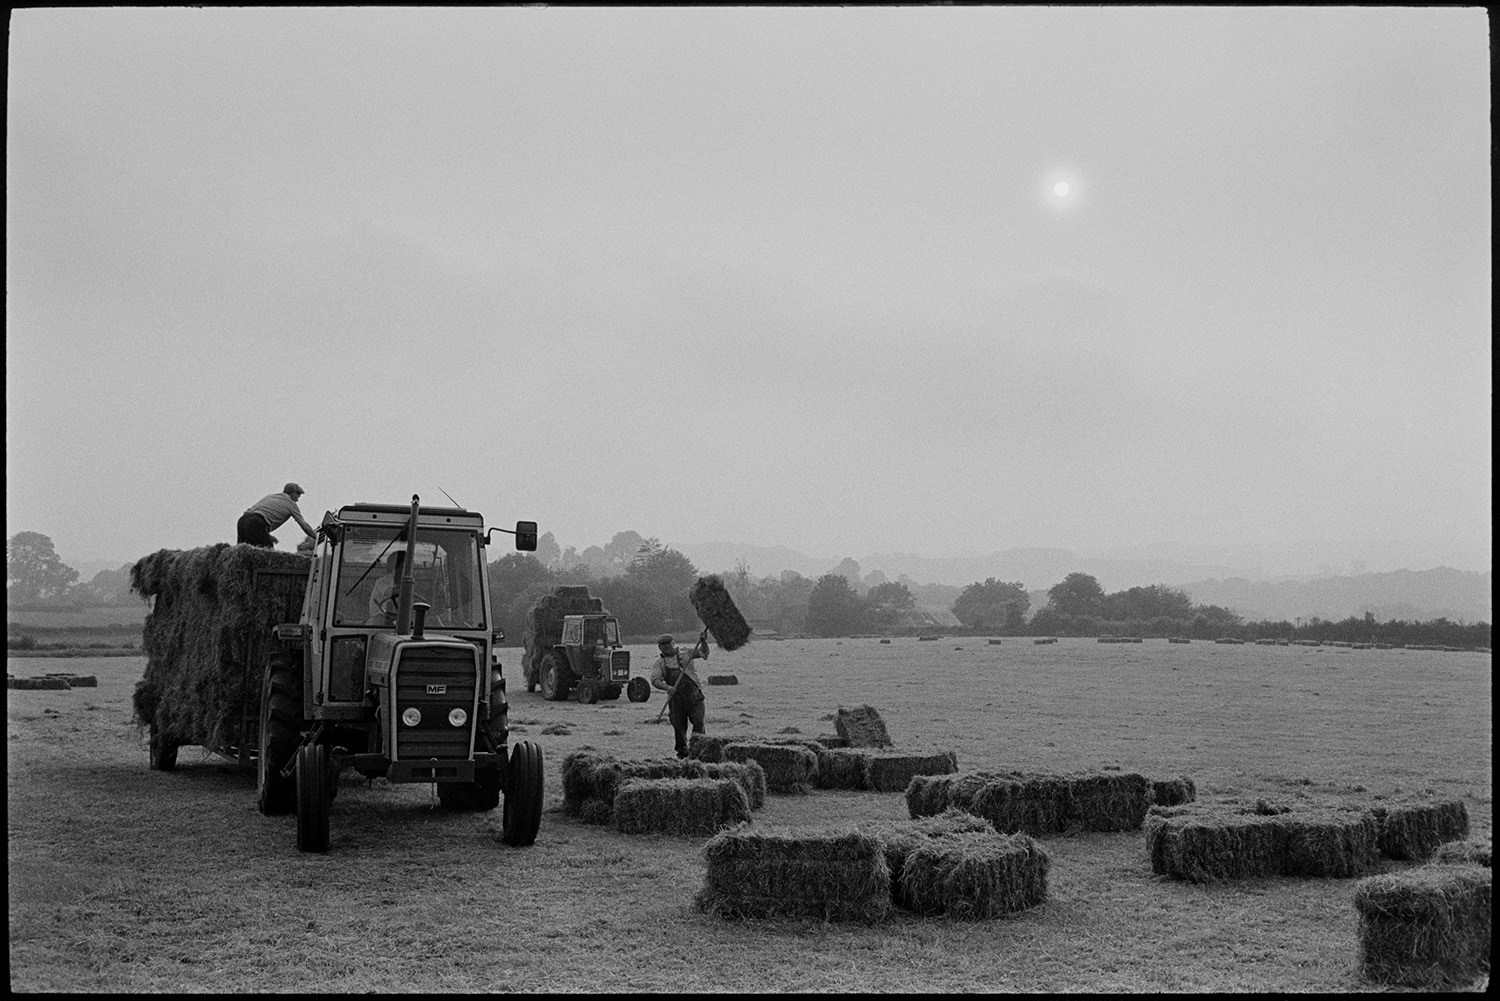 Haymakers loading trailer, evening. 
[Men loading hay bales onto a tractor and trailer, using pitchforks, in a field at Staple Cross, Dolton, in the evening.]